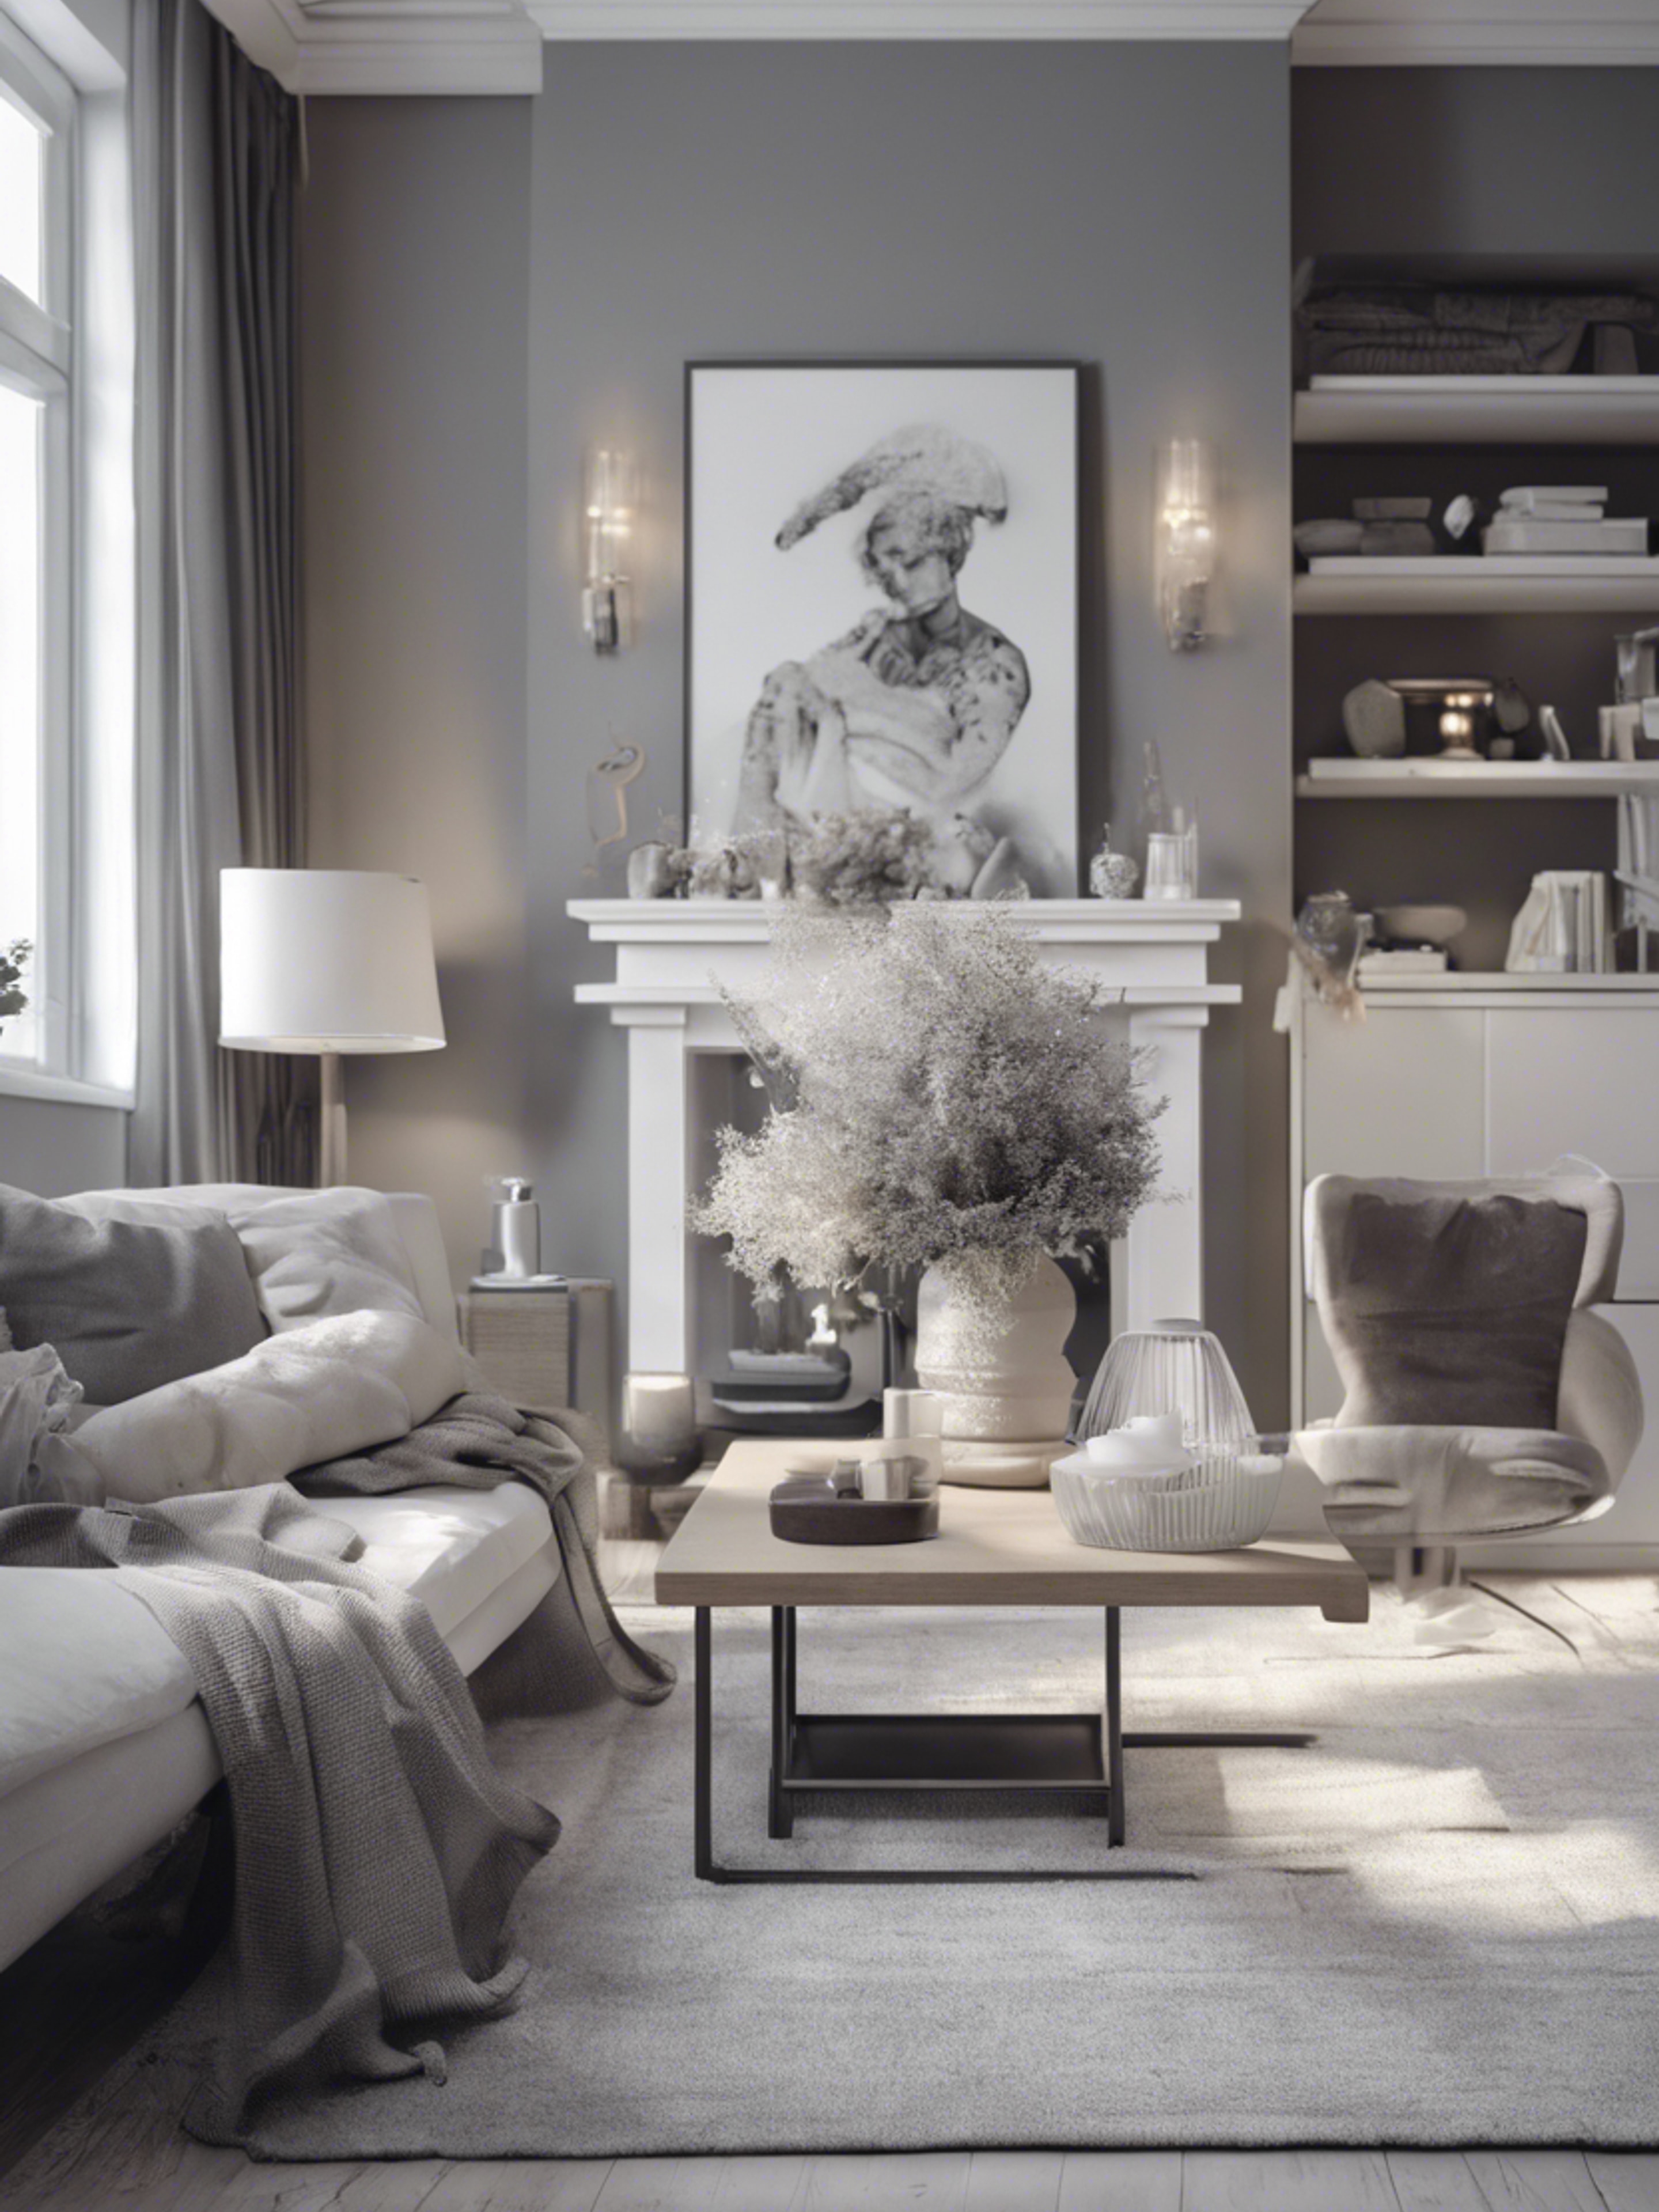 A classic interior design of a living room in neutral gray and white tones. Kertas dinding[b4f6eac2faba4219b360]